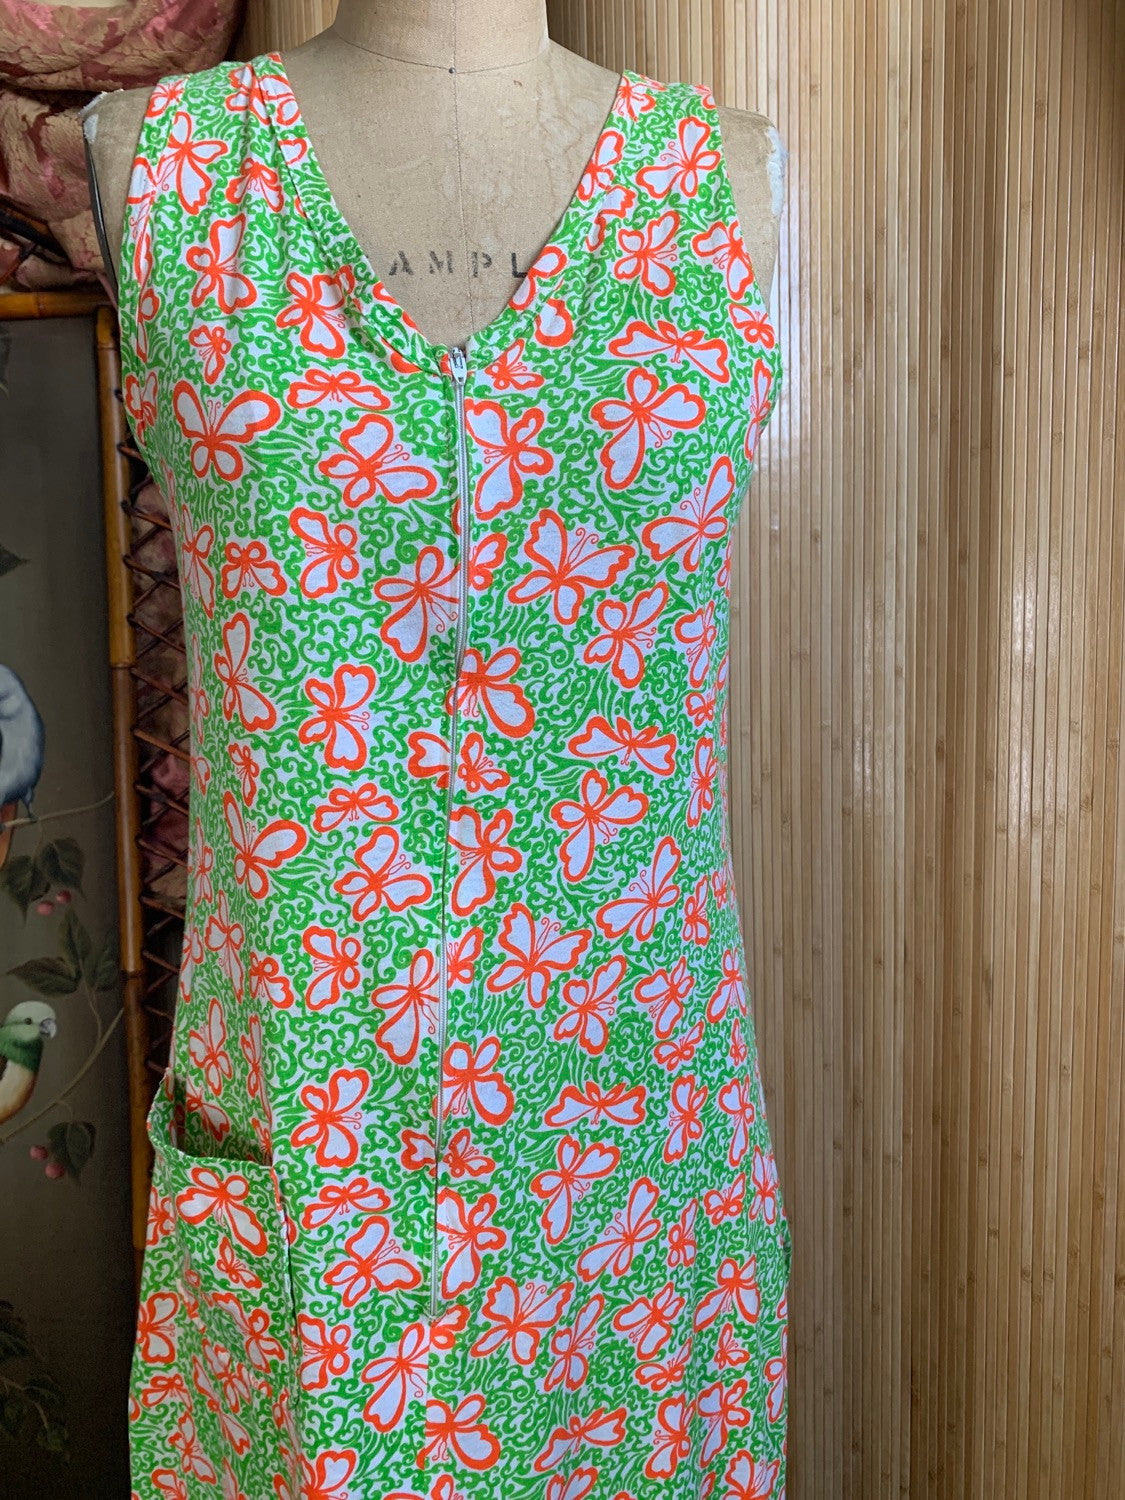 1960s Lilly Pulitzer "The Lilly" Butterfly Print Dress/ Beach Coverup S/M